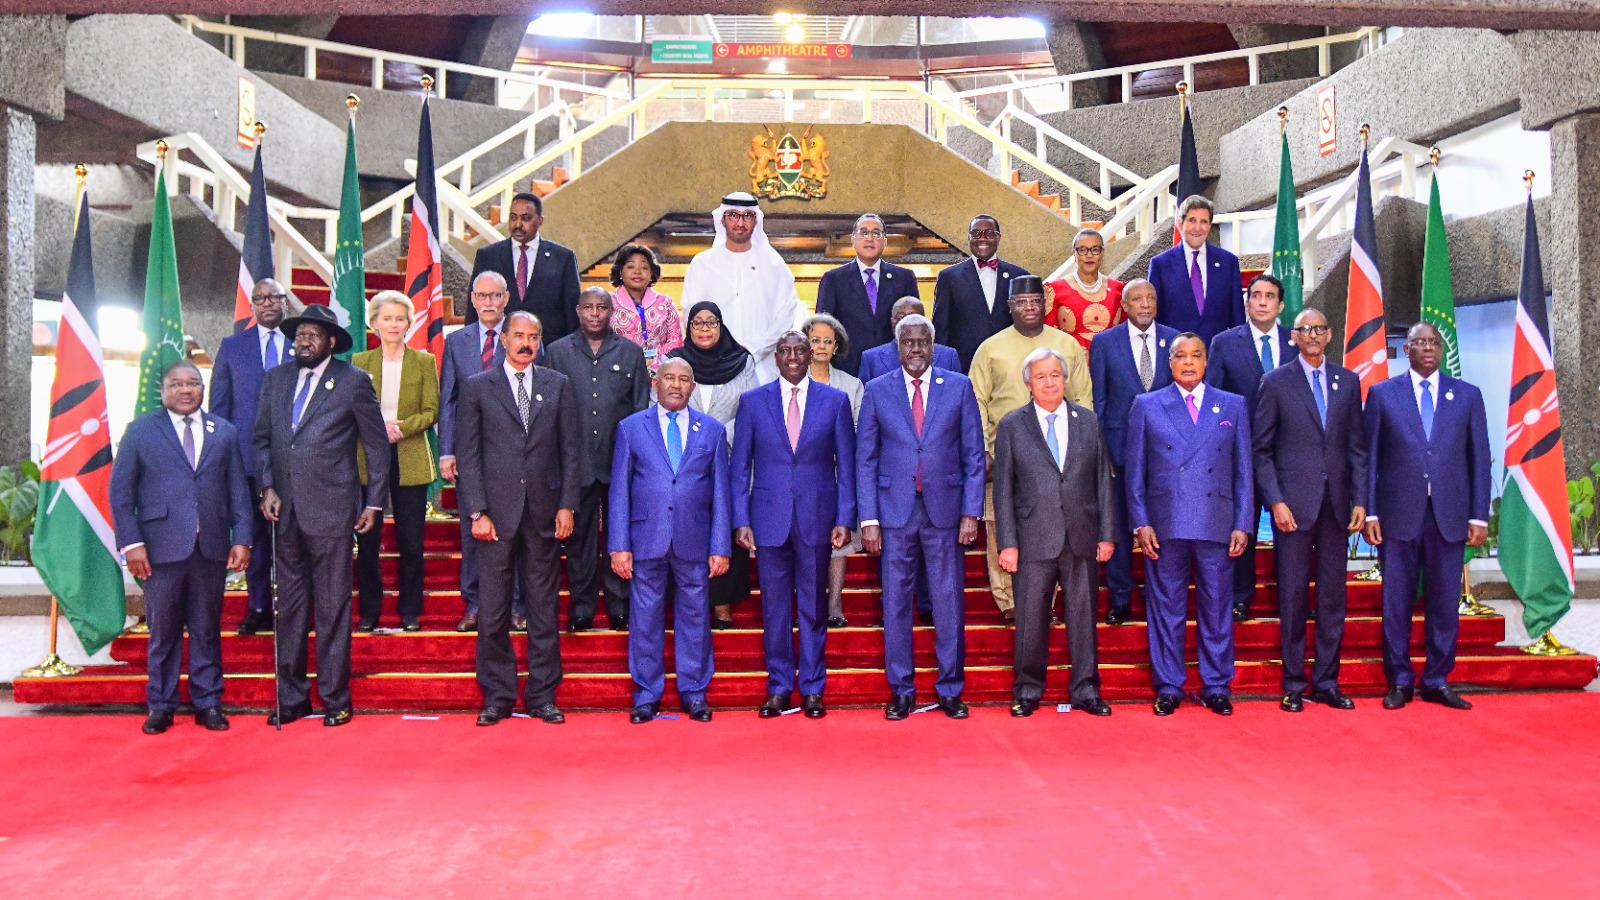 President William Ruto with other Heads of States and Governments and dignitaries at the Kenyatta International Convention Centre, Nairobi, during the opening of the Heads of State session of the Africa Climate Summit. PHOTO/PCS.